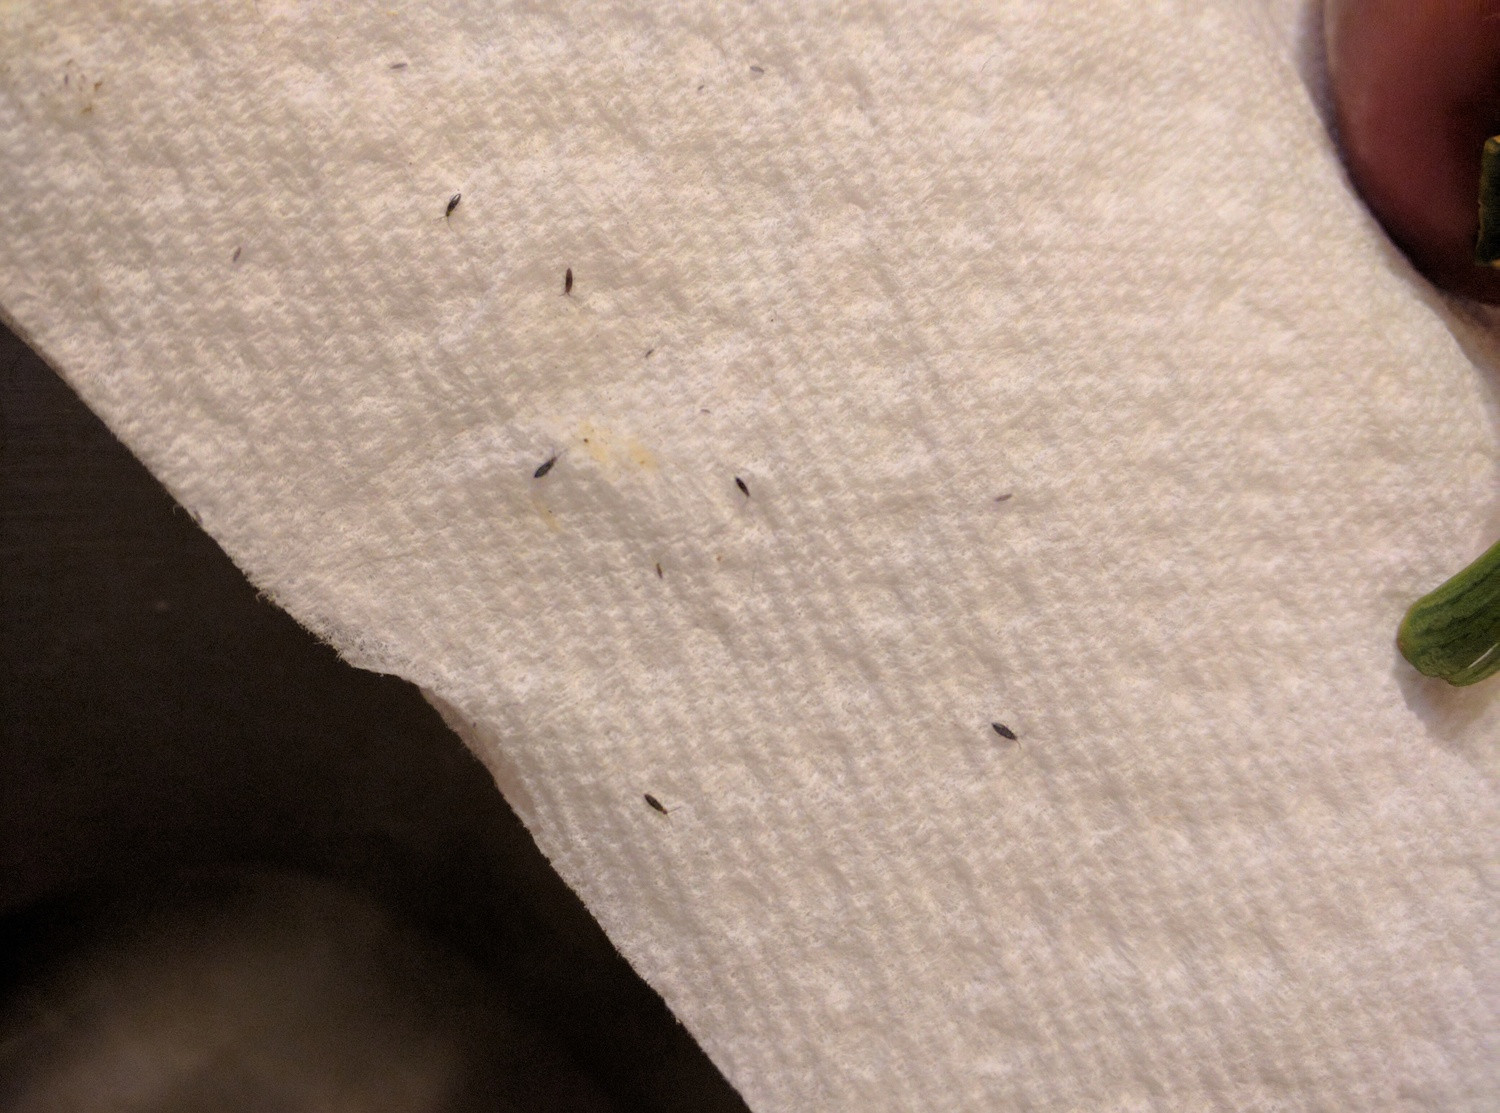 little tiny bugs by kitchen sink